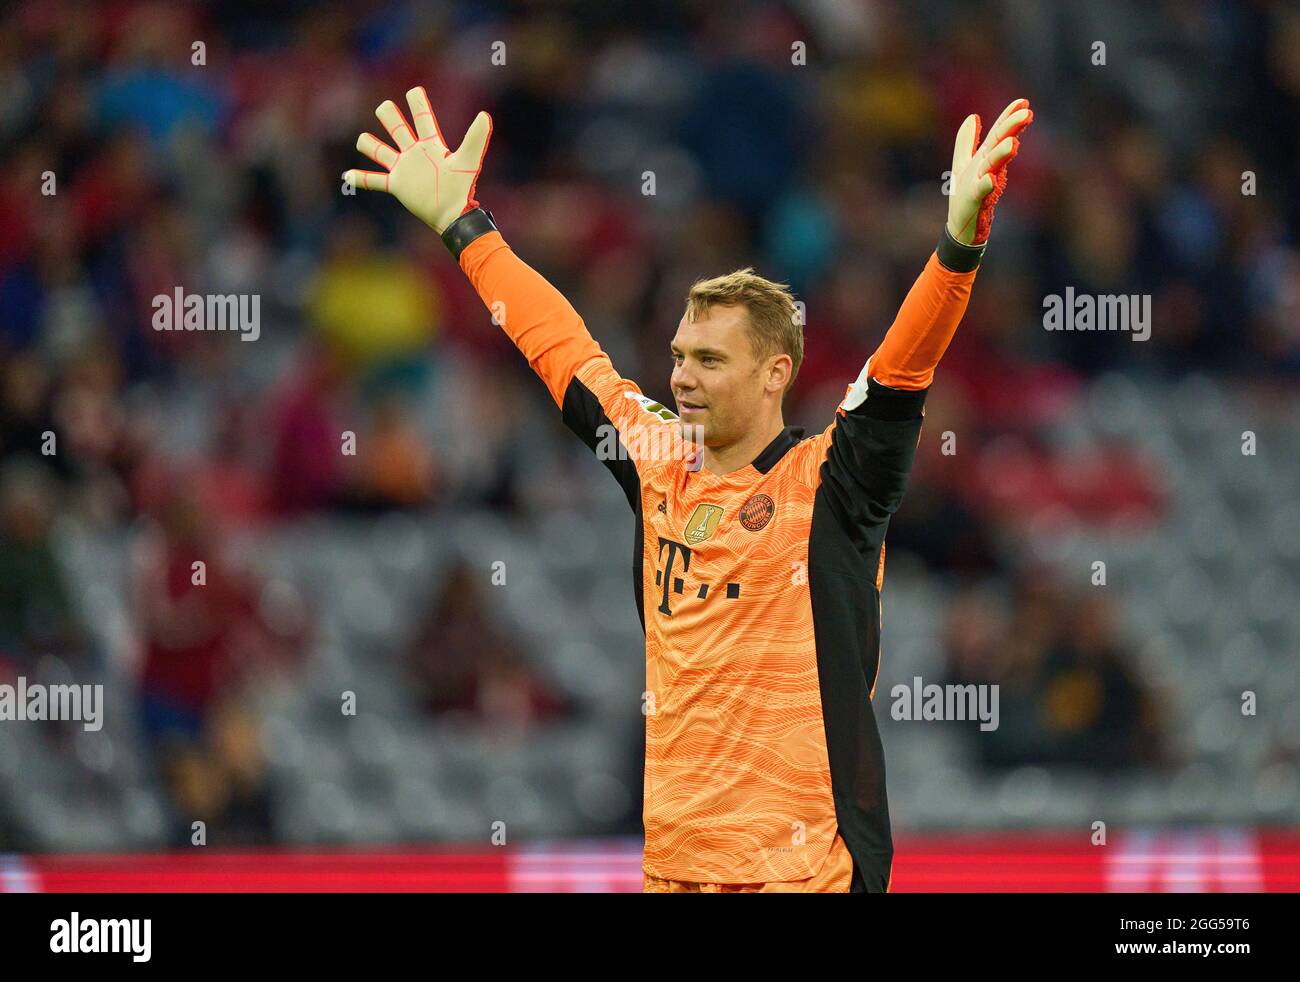 Schlussjubel Manuel NEUER, goalkeeper FCB 1  in the match FC BAYERN MUENCHEN - HERTHA BSC BERLIN 1.German Football League on August 28, 2021 in Munich, Germany. Season 2021/2022, matchday 3, 1.Bundesliga, FCB, München, 3.Spieltag. © Peter Schatz / Alamy Live News    - DFL REGULATIONS PROHIBIT ANY USE OF PHOTOGRAPHS as IMAGE SEQUENCES and/or QUASI-VIDEO - Stock Photo